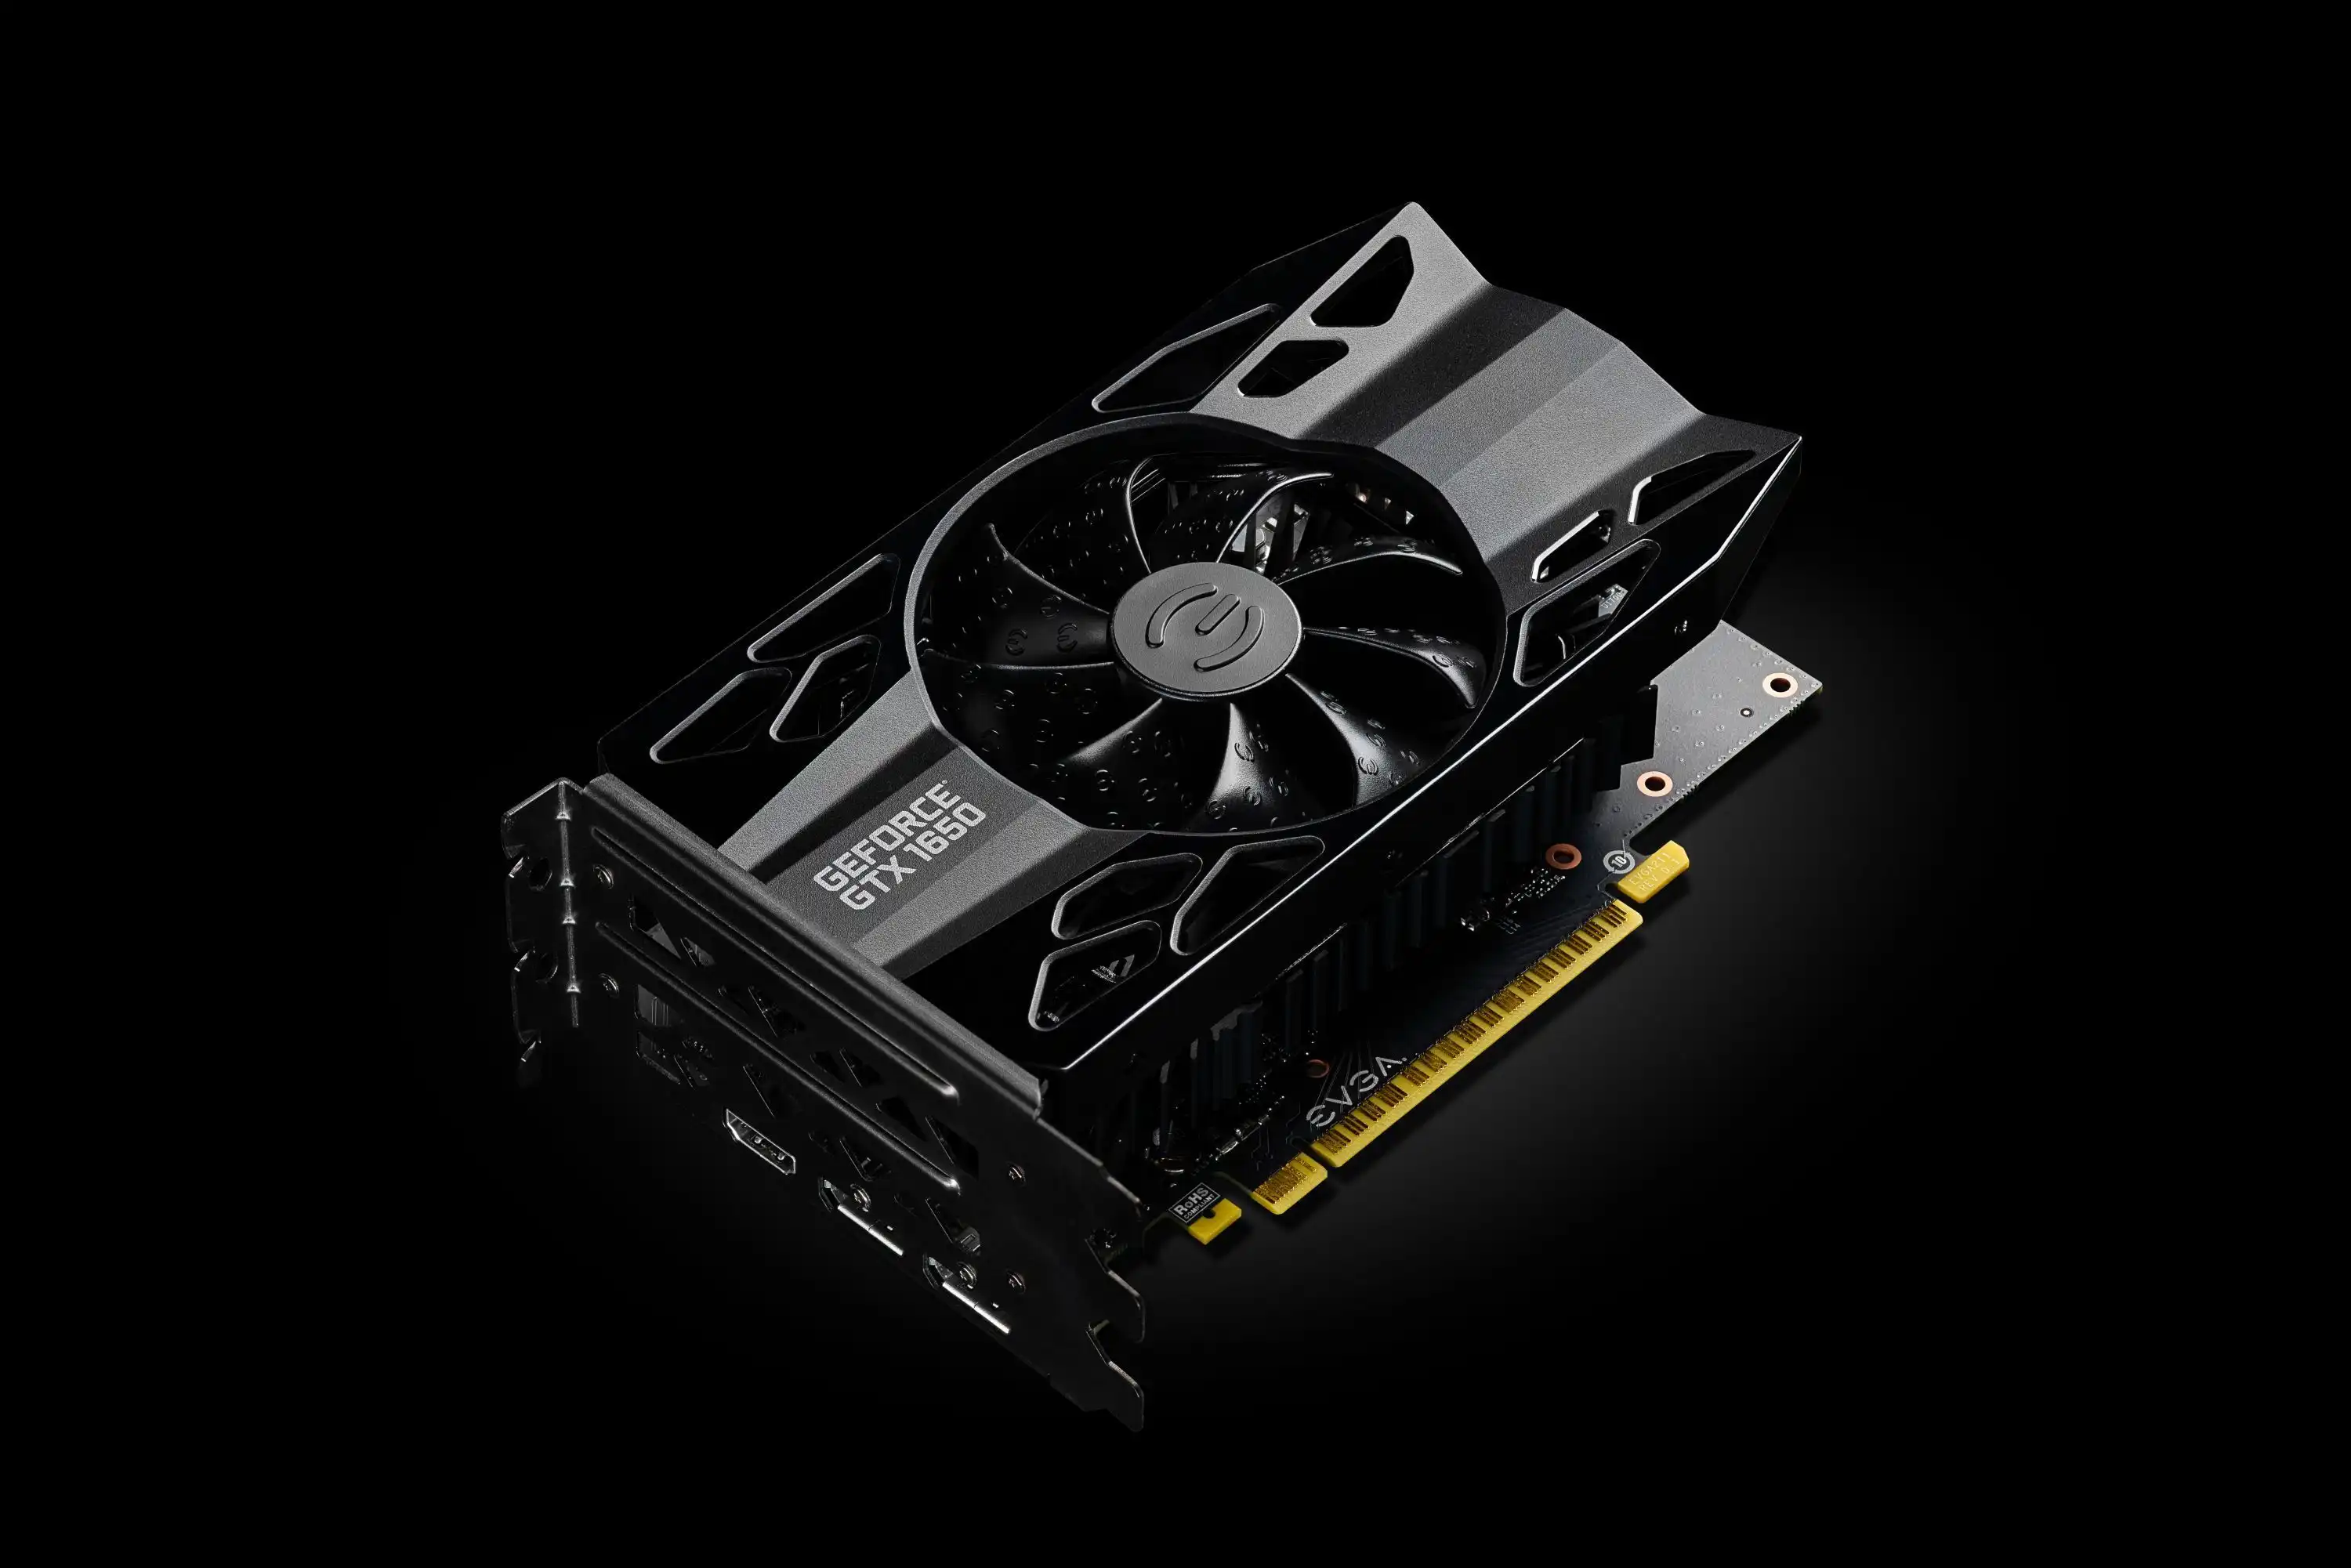 The end of an era for NVIDIA's GeForce GTX series – Nvidia